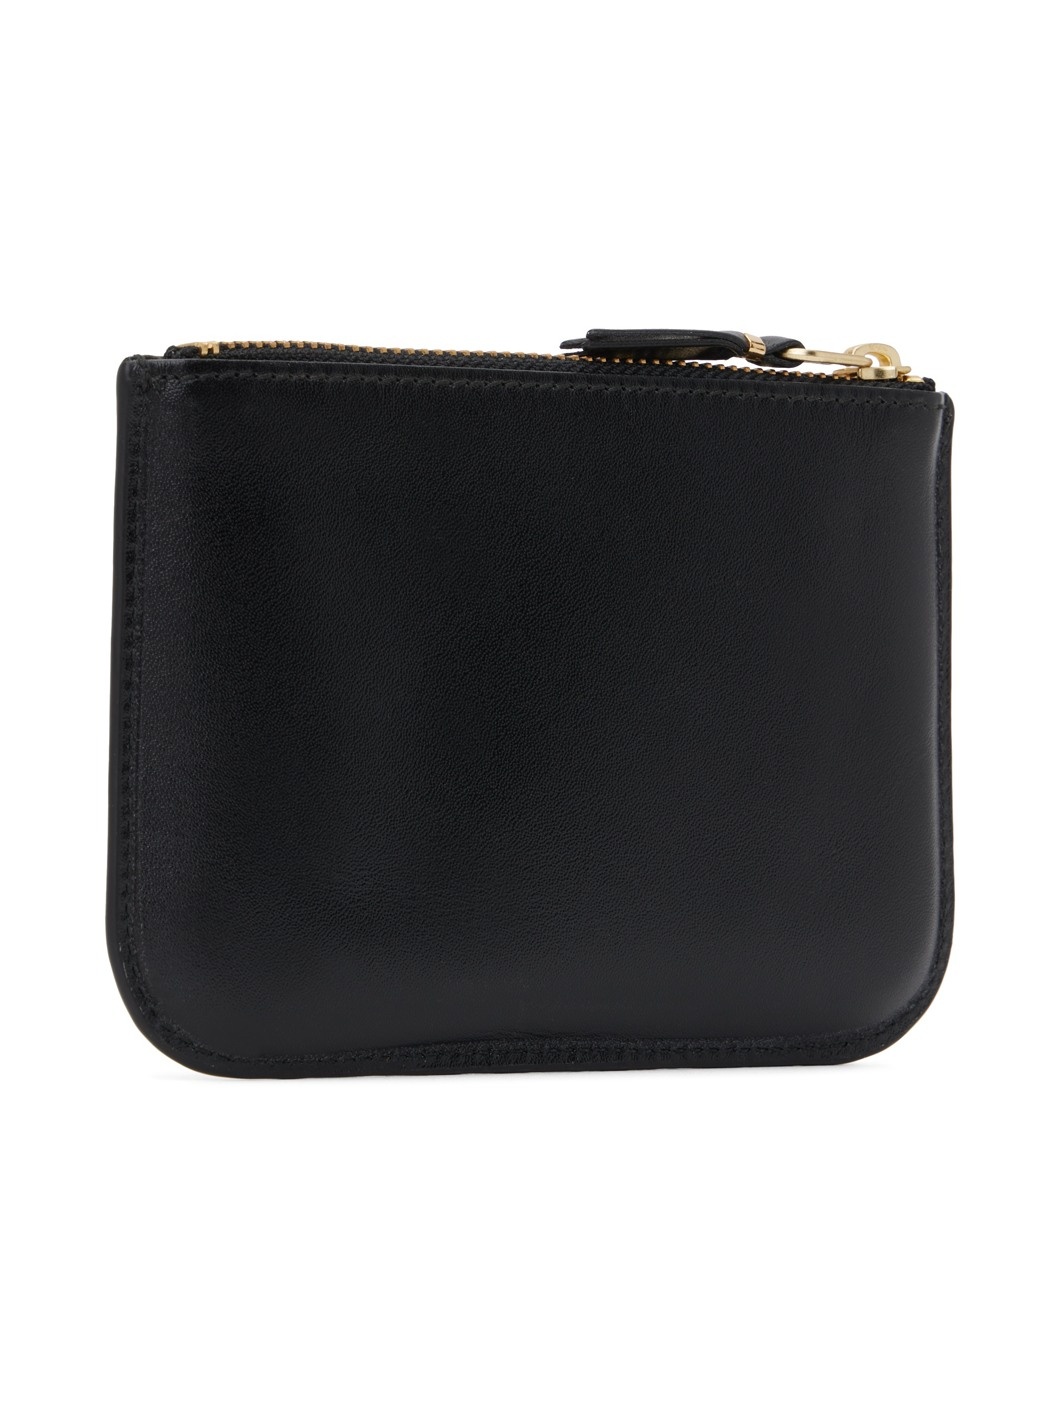 Black Small Outside Pocket Pouch - 3